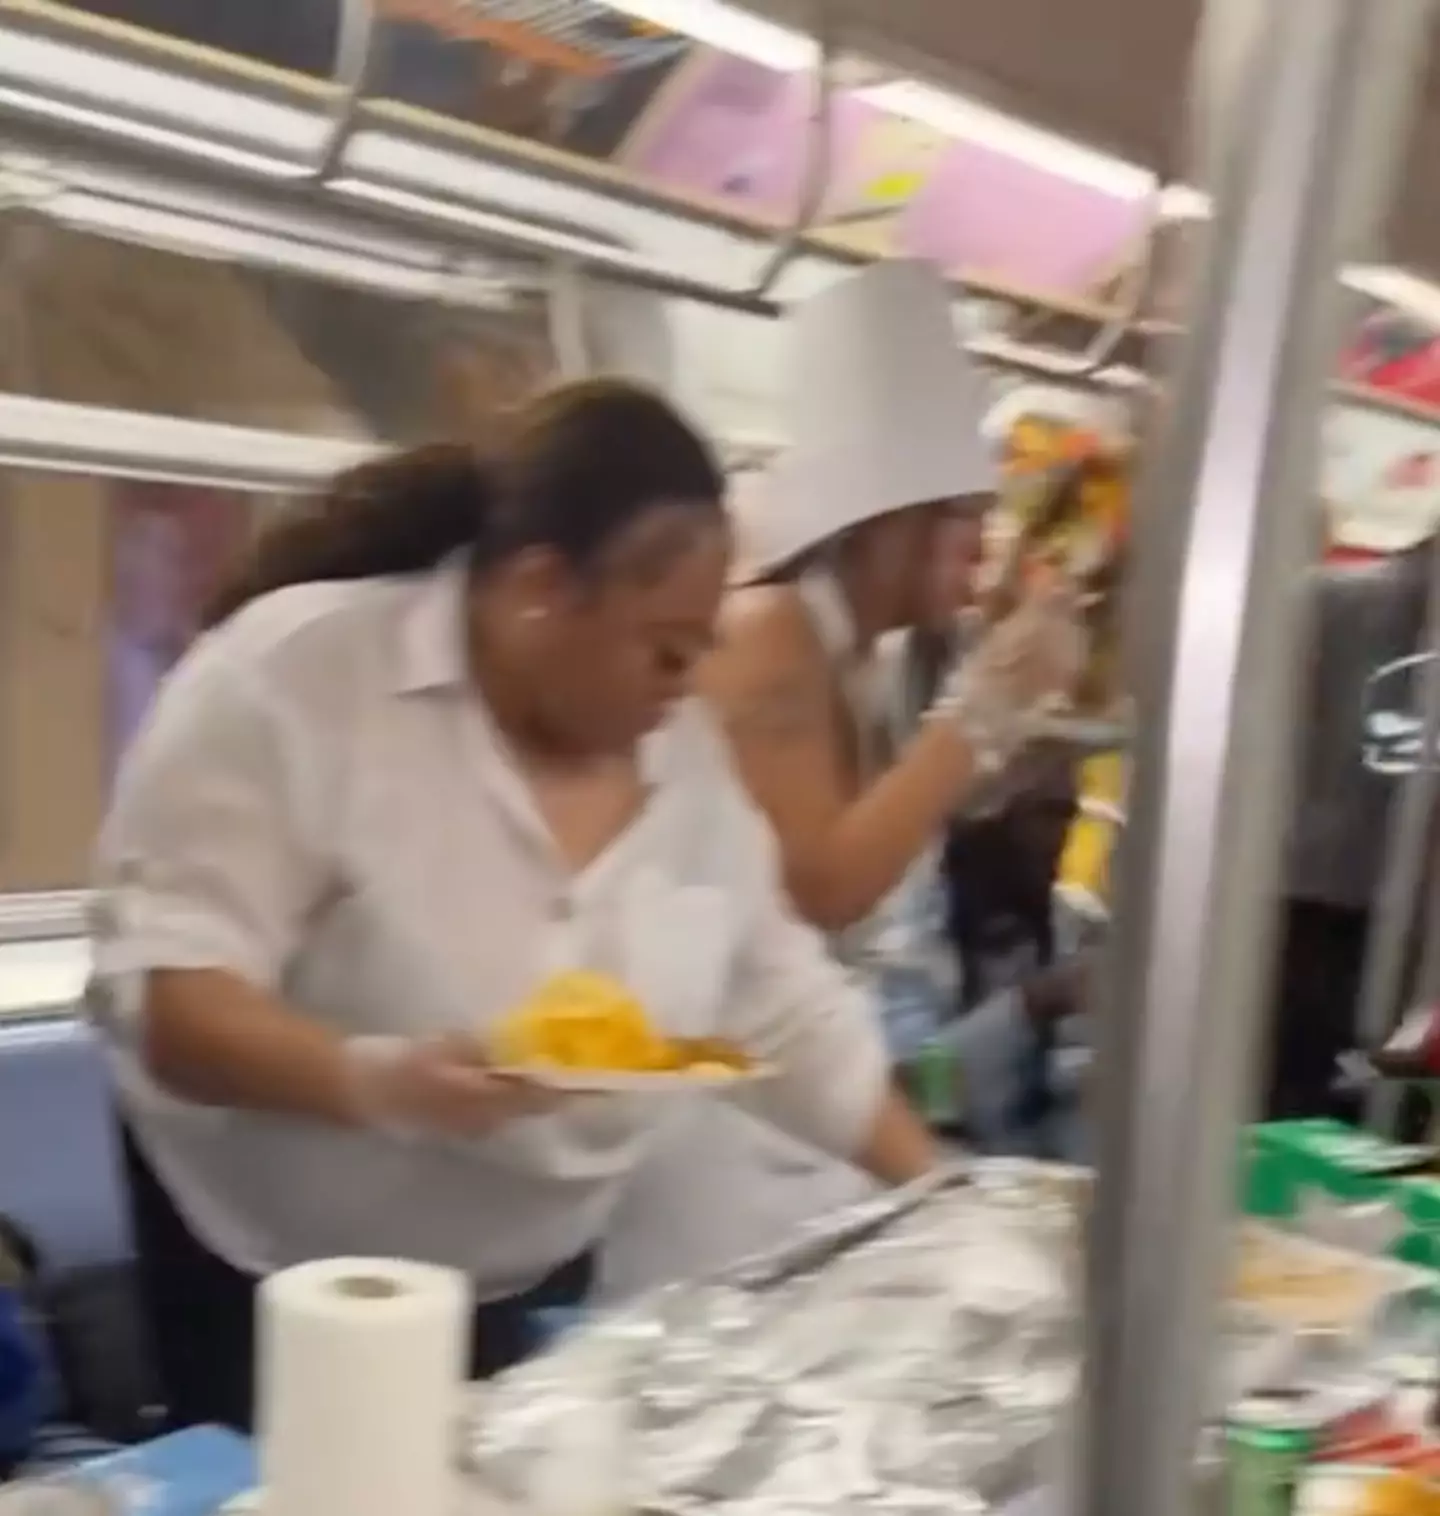 They set a table up on the train.